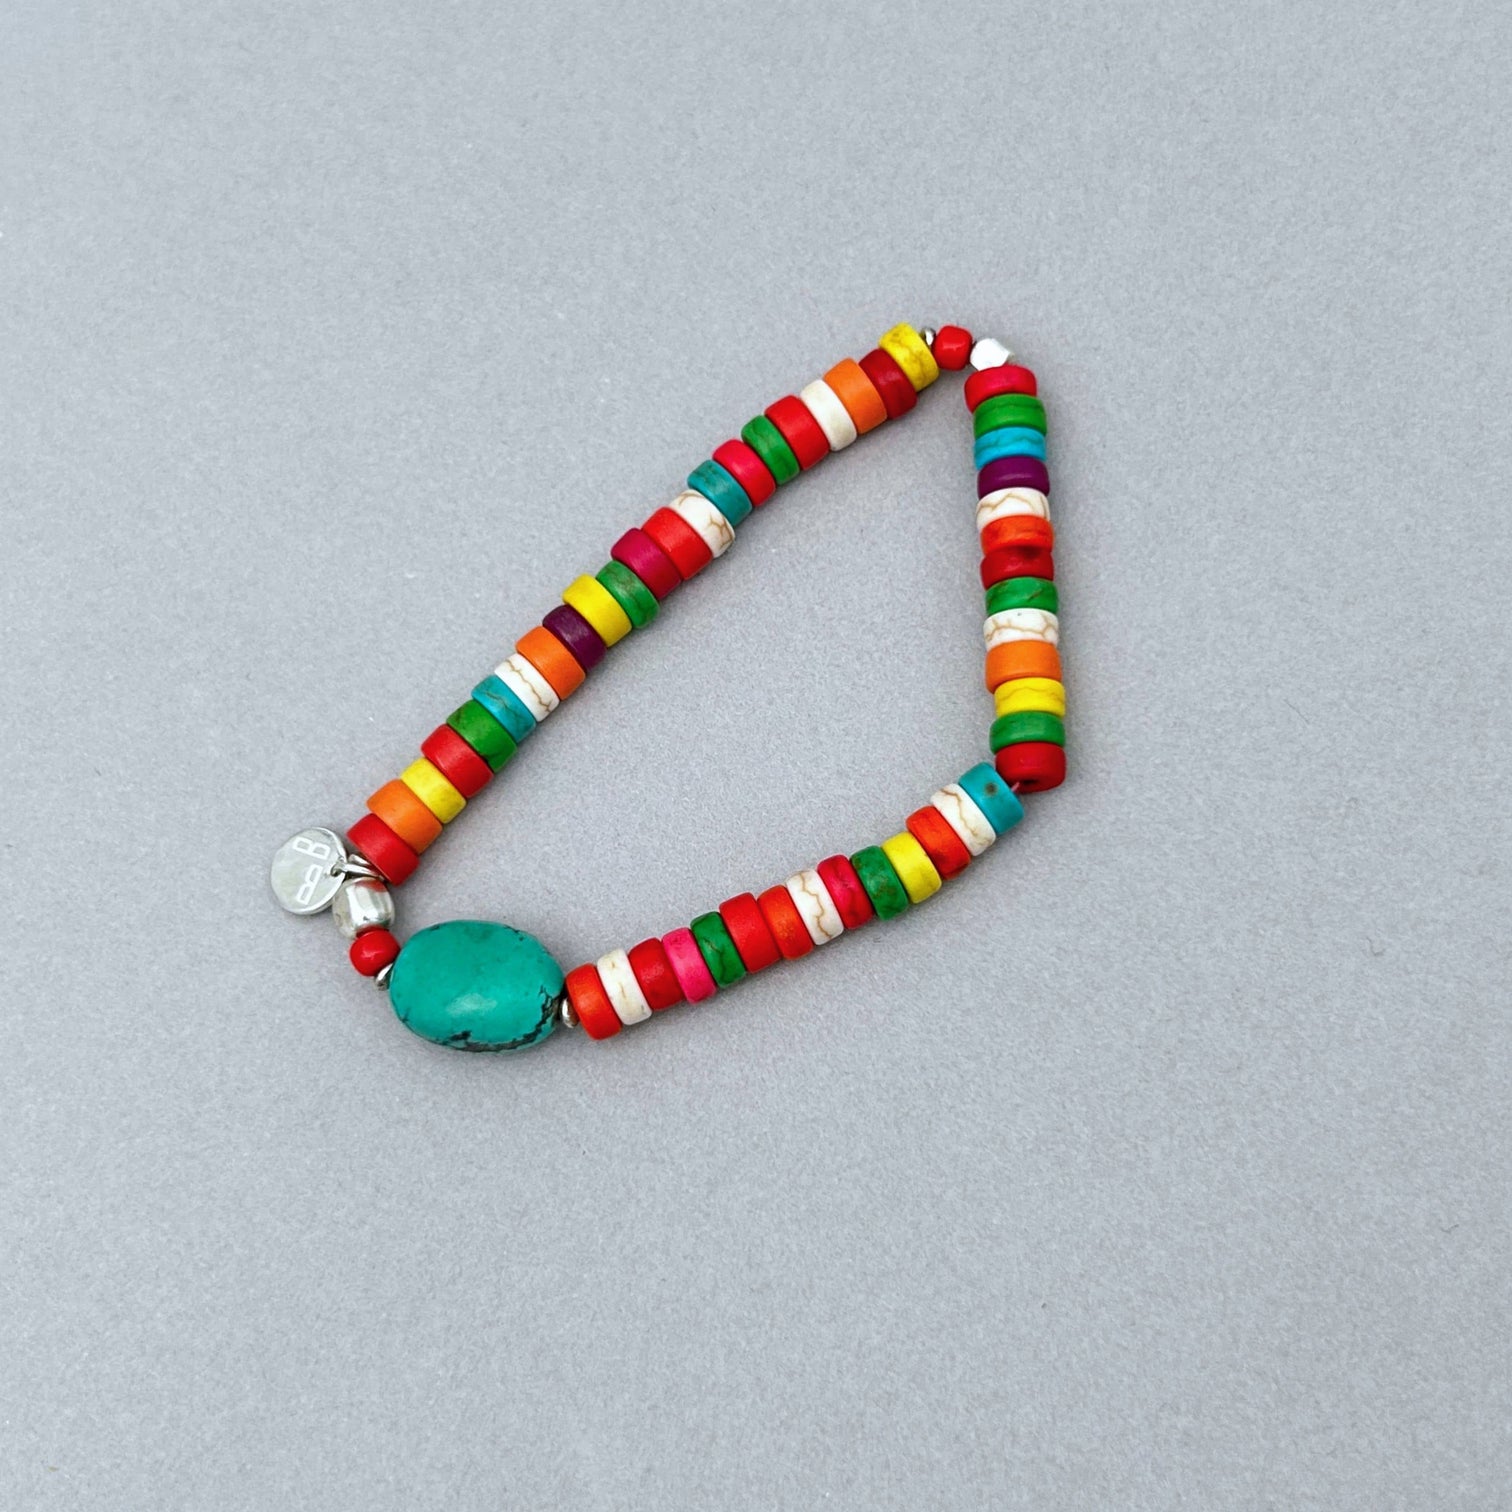 The Trixie Bracelet in rainbow-coloured Howlite Discs is the grown-up interpretation of the candy bracelets we used to wear when we were kids. 